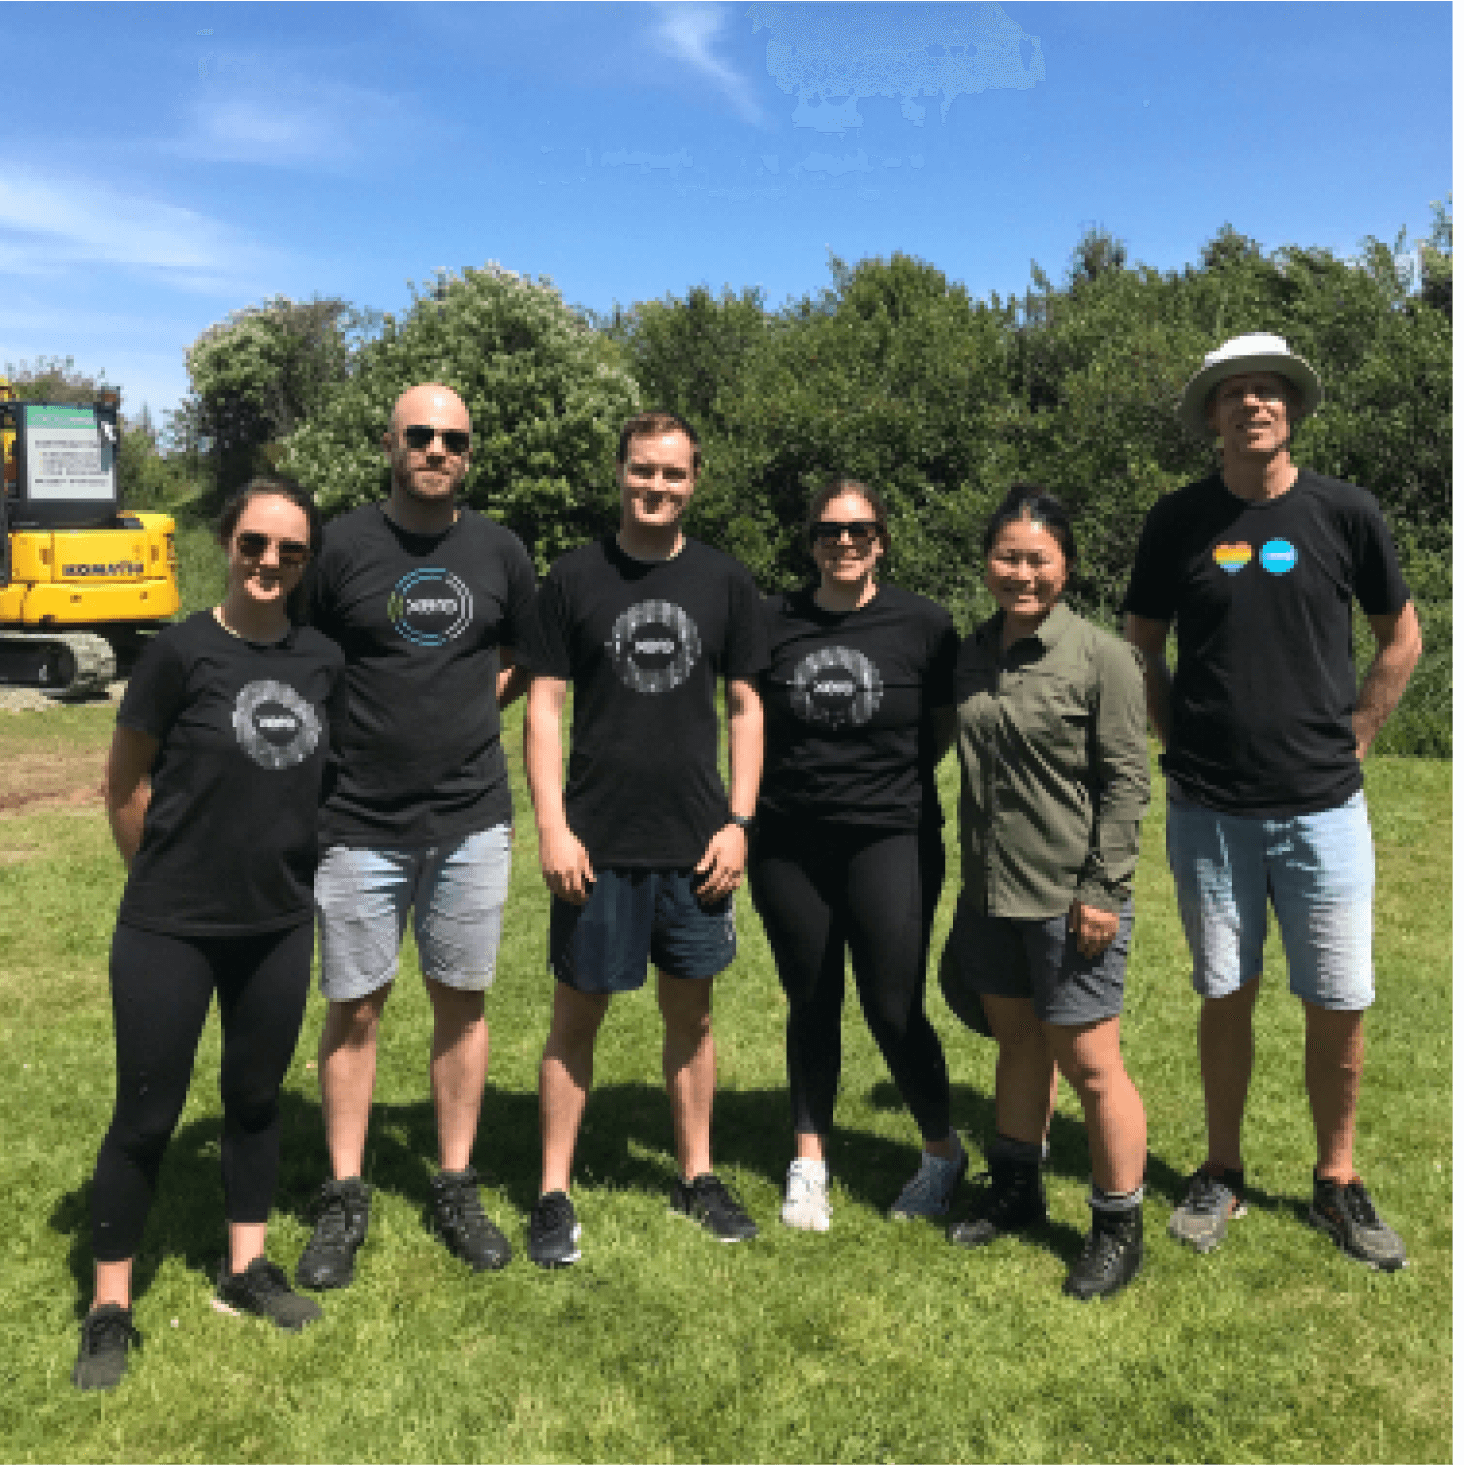 Xero staff members outside volunteering at a sanctuary.